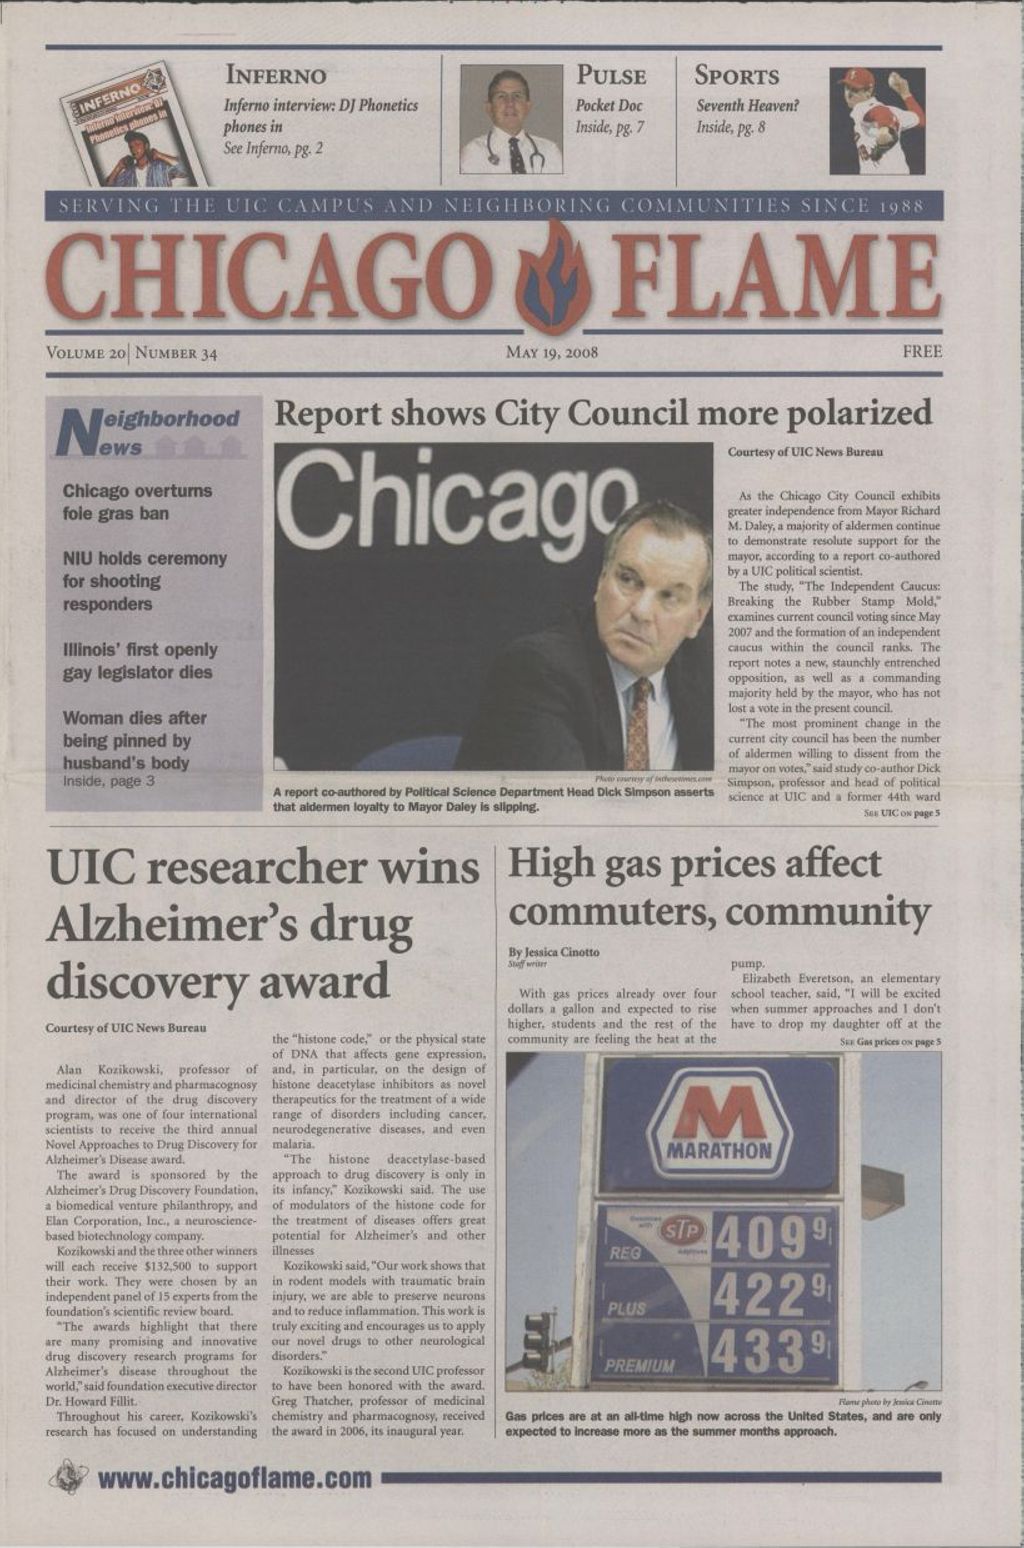 Miniature of Chicago Flame (May 19, 2008)